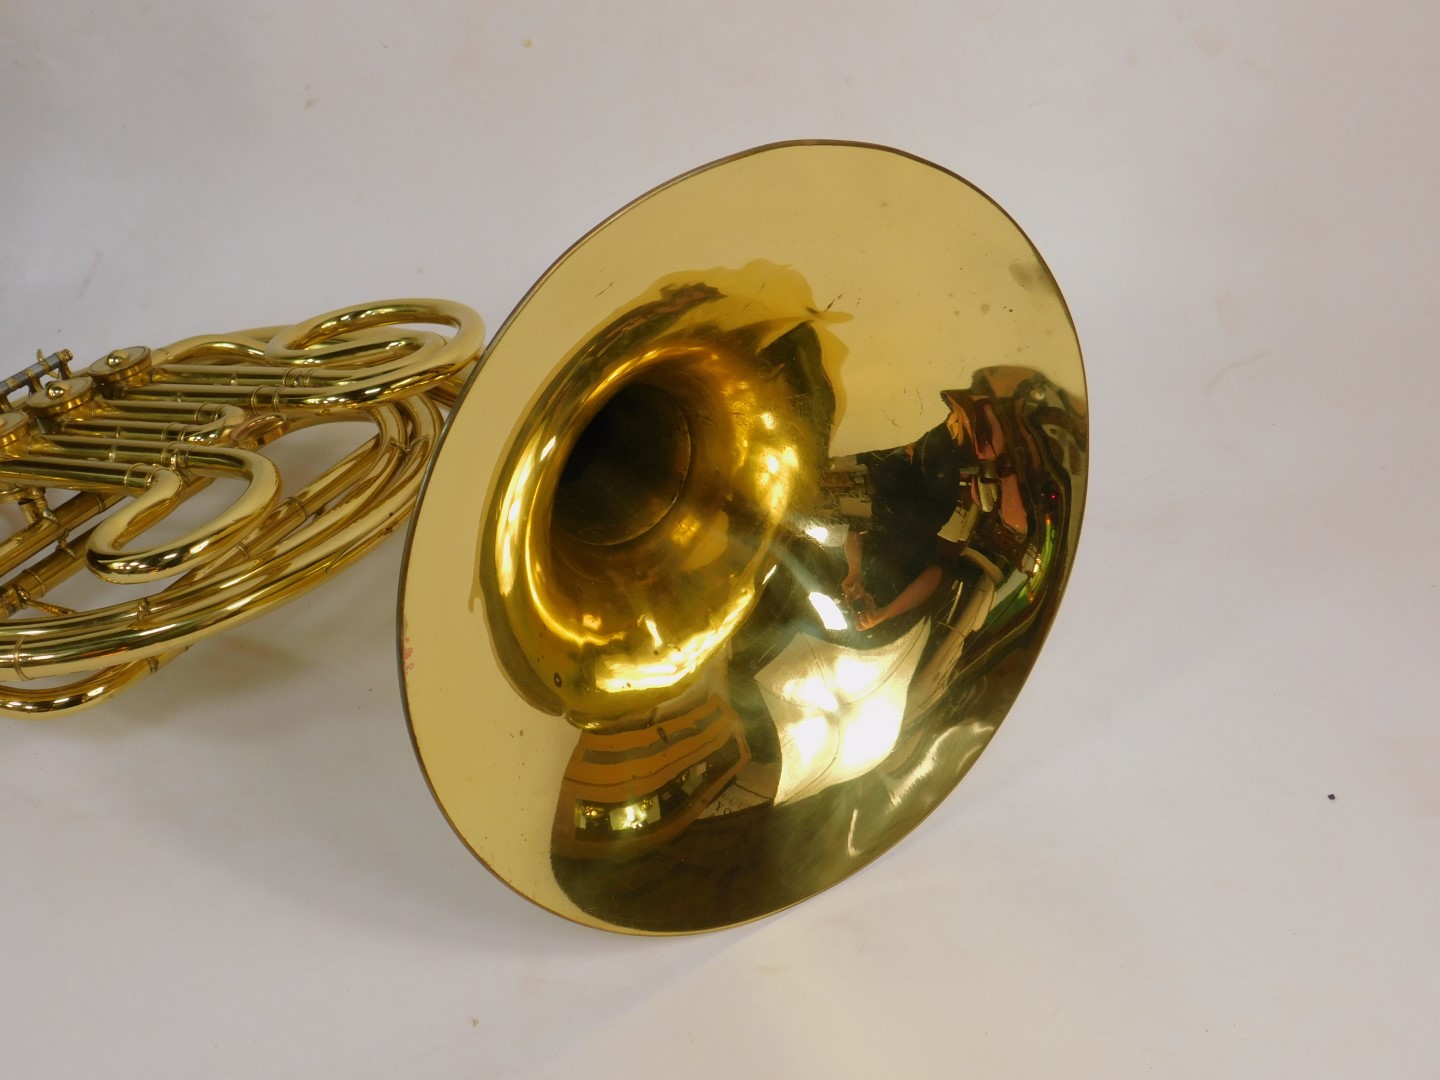 A Parrot brass French horn, cased. - Image 4 of 4